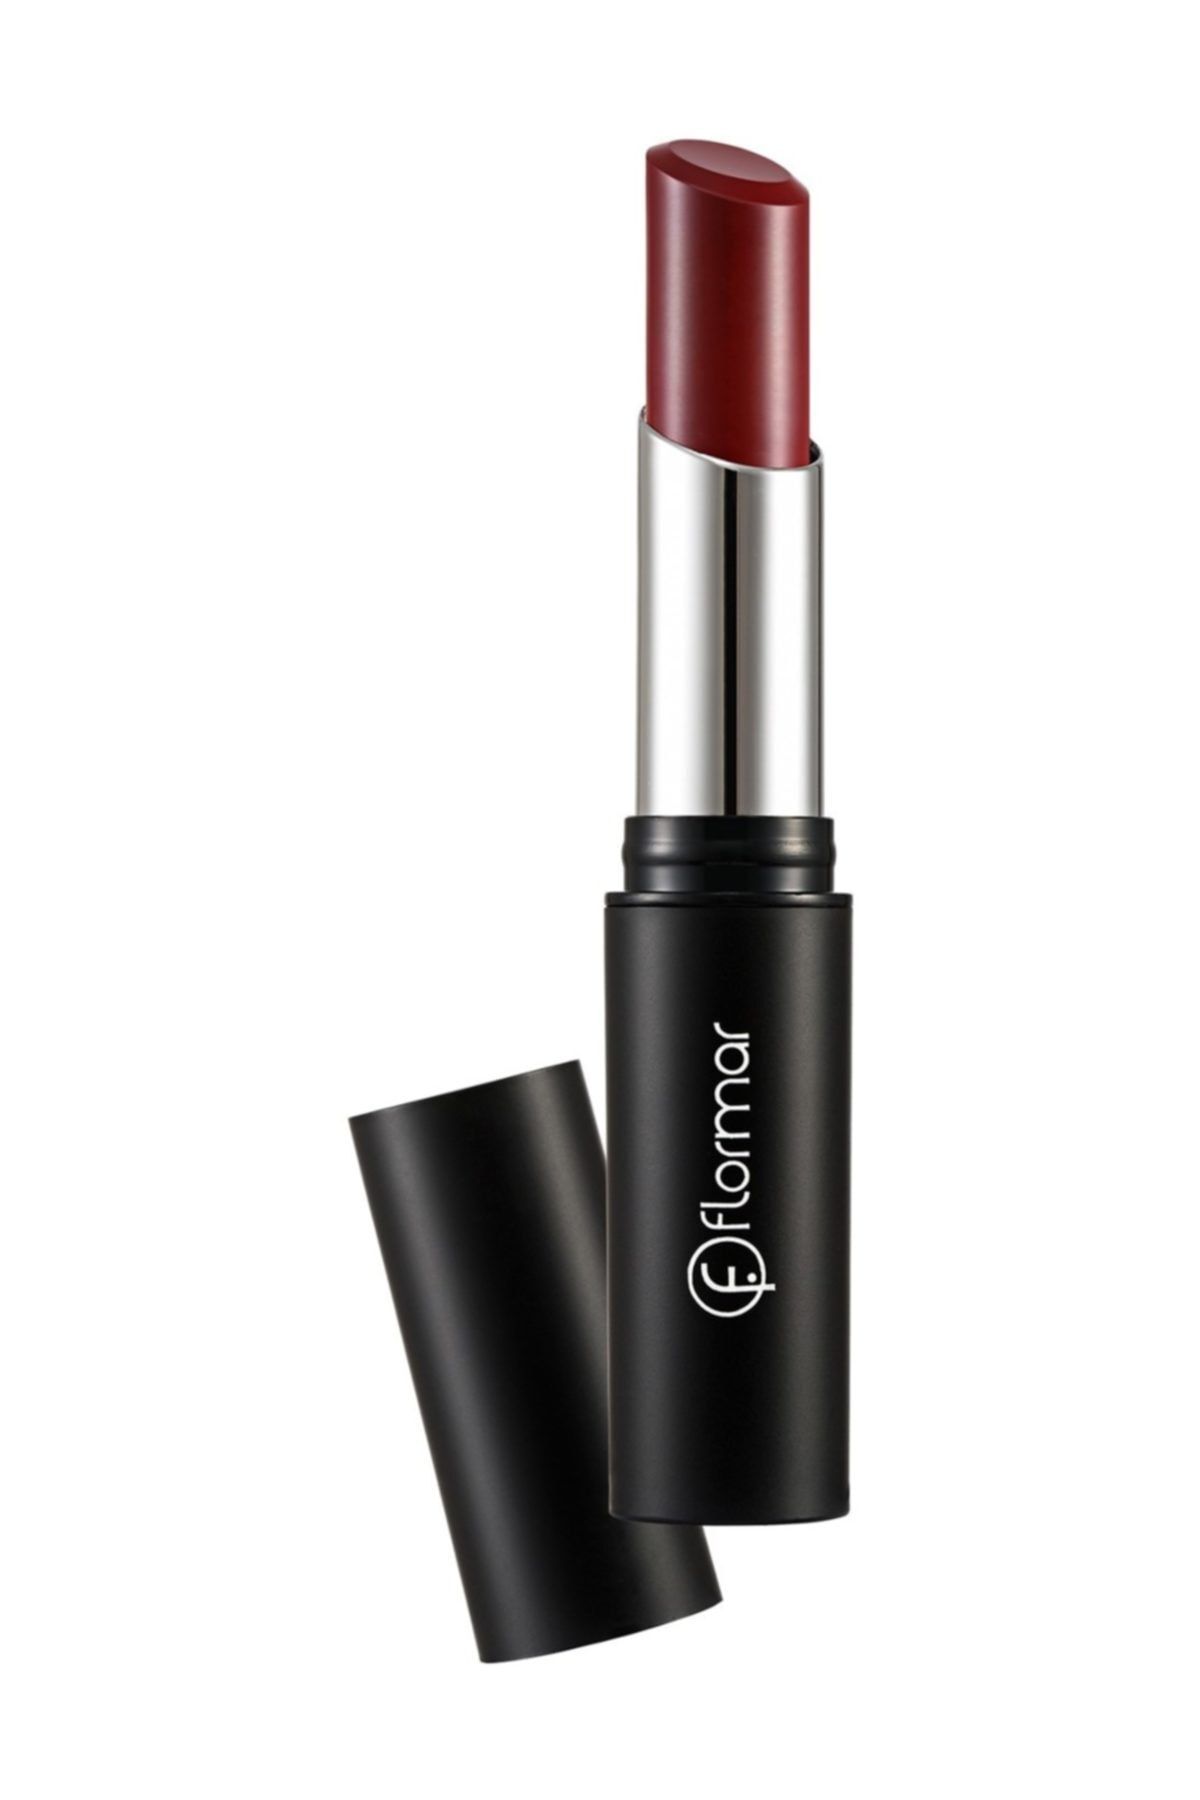 Flormar Ruj - Deluxe Shine gloss Stylo Red Passion 8690604171736